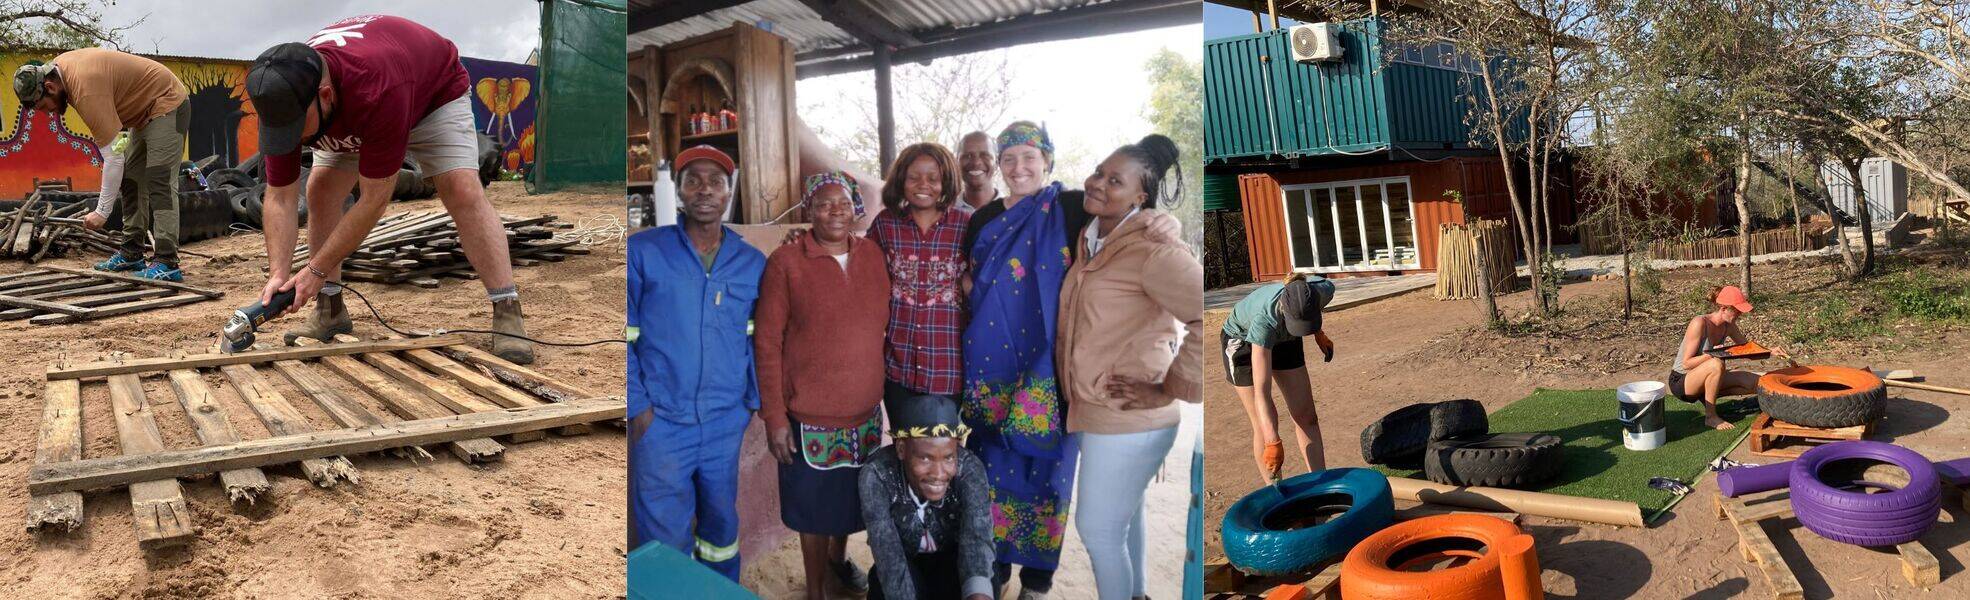 Volunteer work in the Social Entrepreneur Project in South Africa